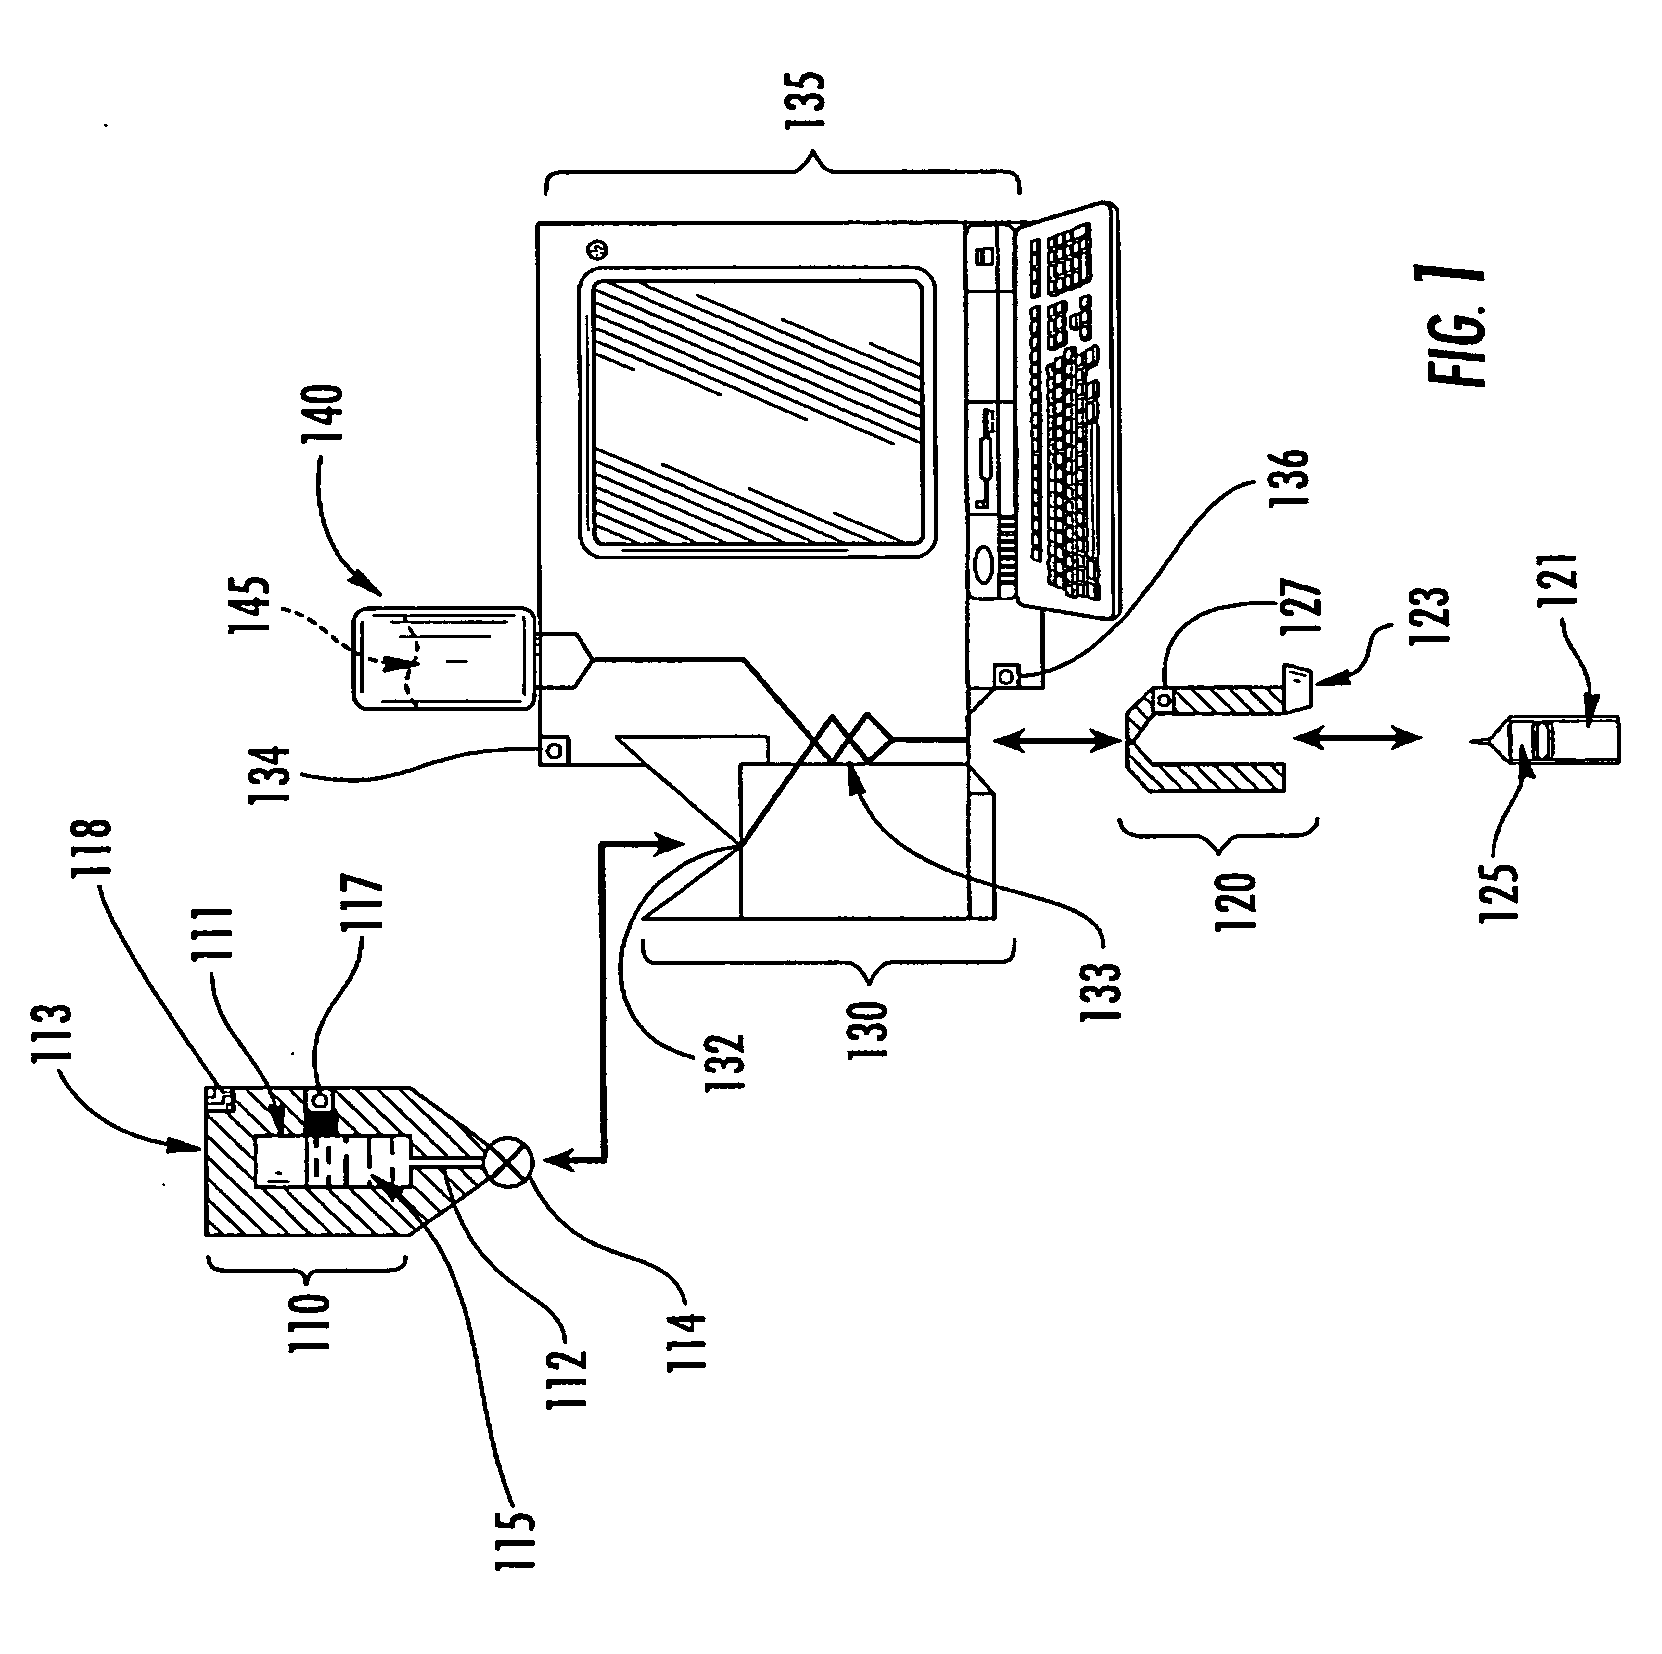 System, method, and computer program product for handling, mixing, dispensing, and injecting radiopharmaceutical agents